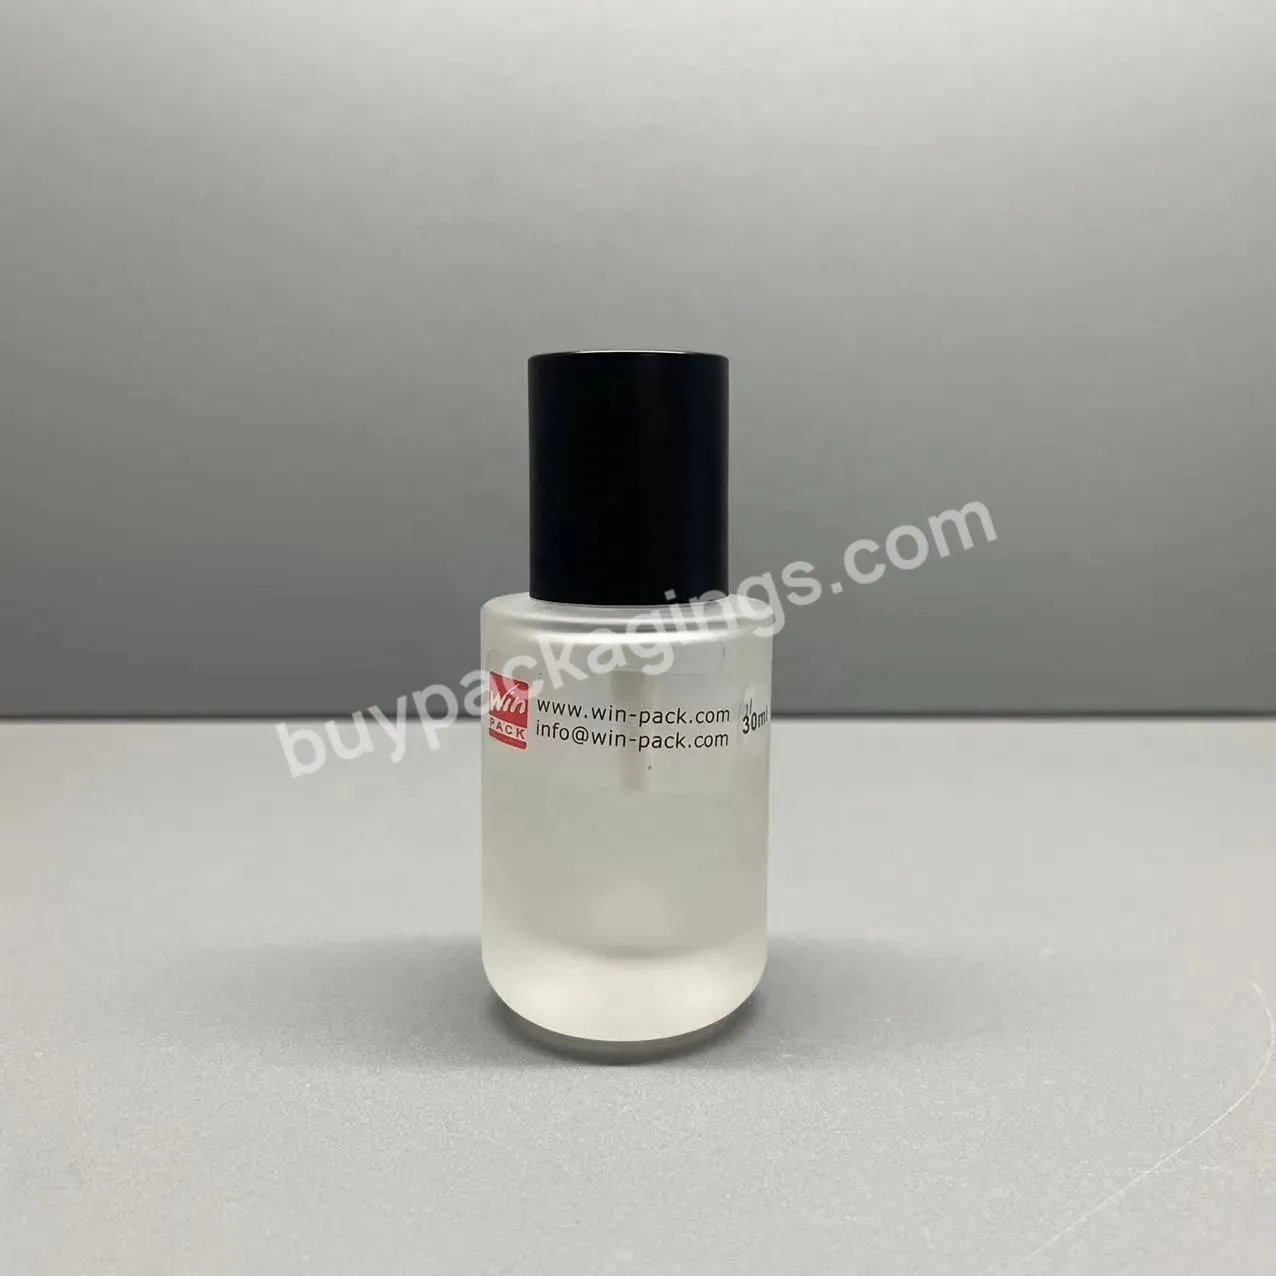 30ml Round Bottom Frosted Glass Foundation Serum Bottle With Black Pump And Cap - Buy Square Glass Skincare Bottles,30ml Round Bottom Frosted Glass Bottle,Serum Bottle With Black Pump And Cap.